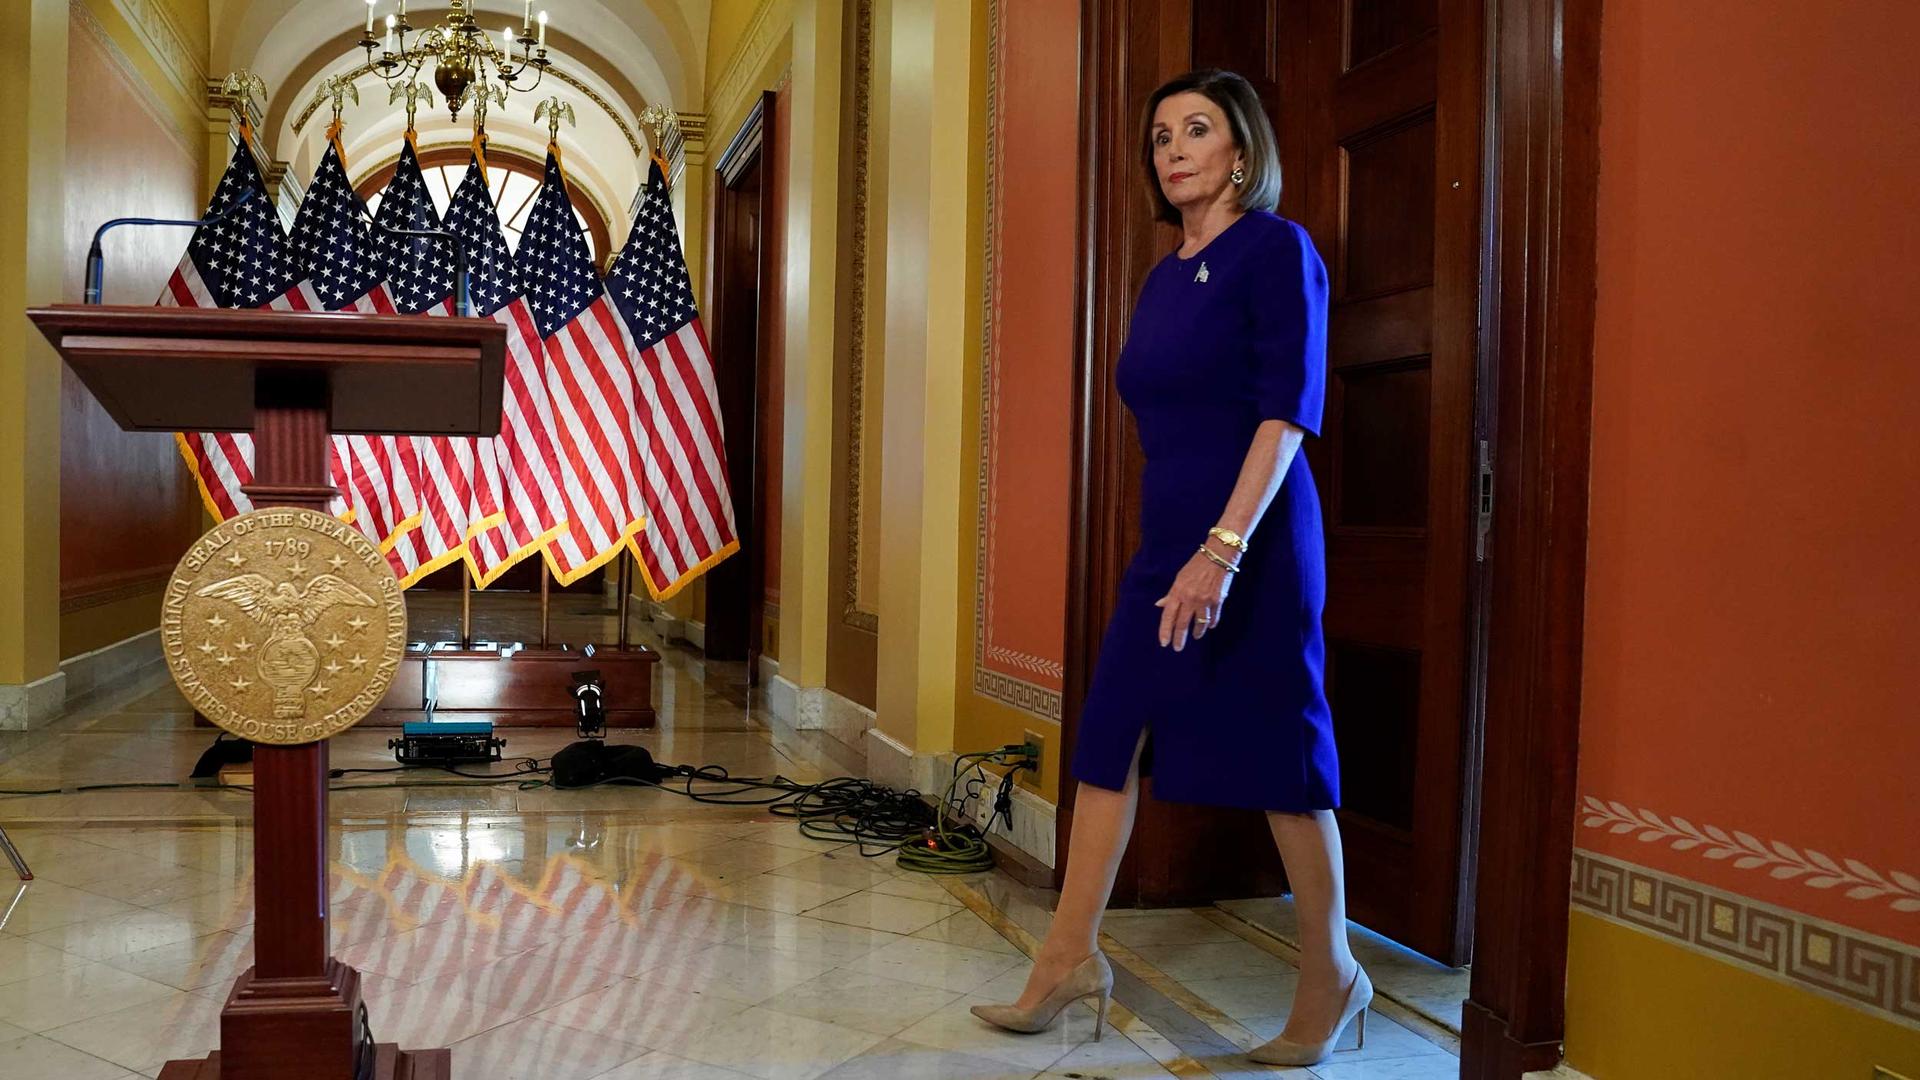 Nancy Pelosi walks up to a podium with a line of American flags set up behind it